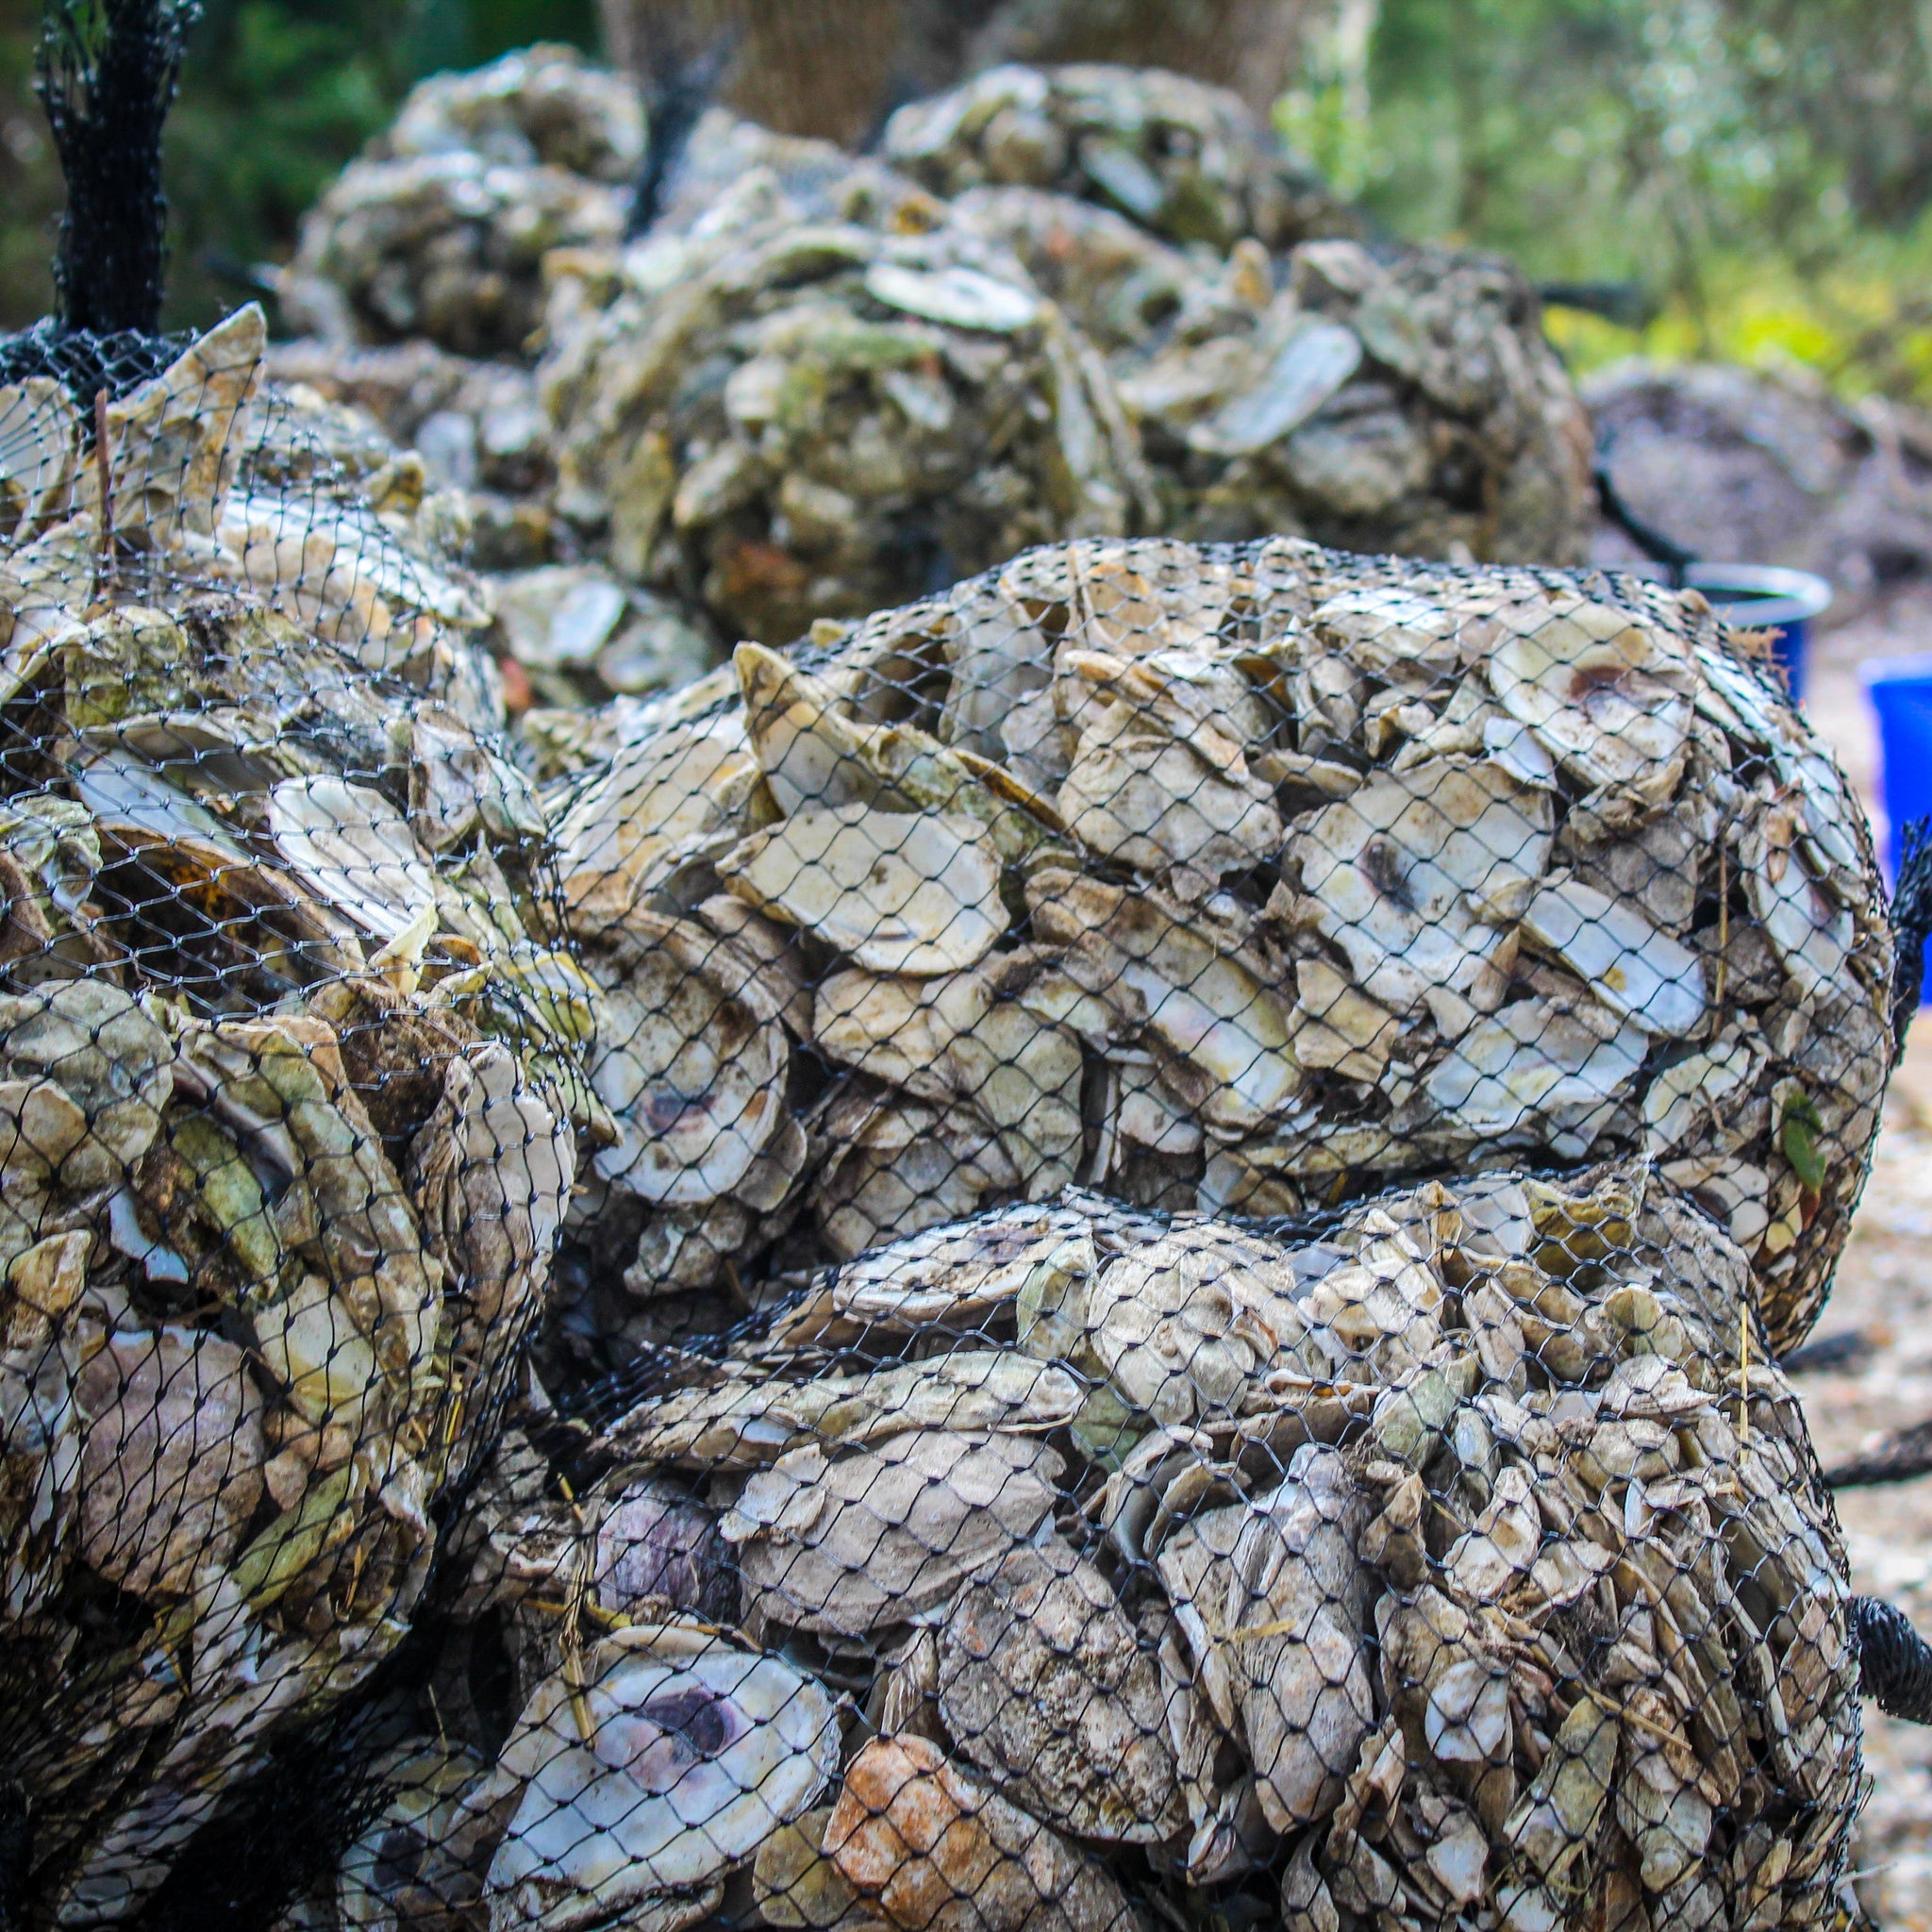 Toadfish Outfitters donates $20K to recreational oyster harvest study.